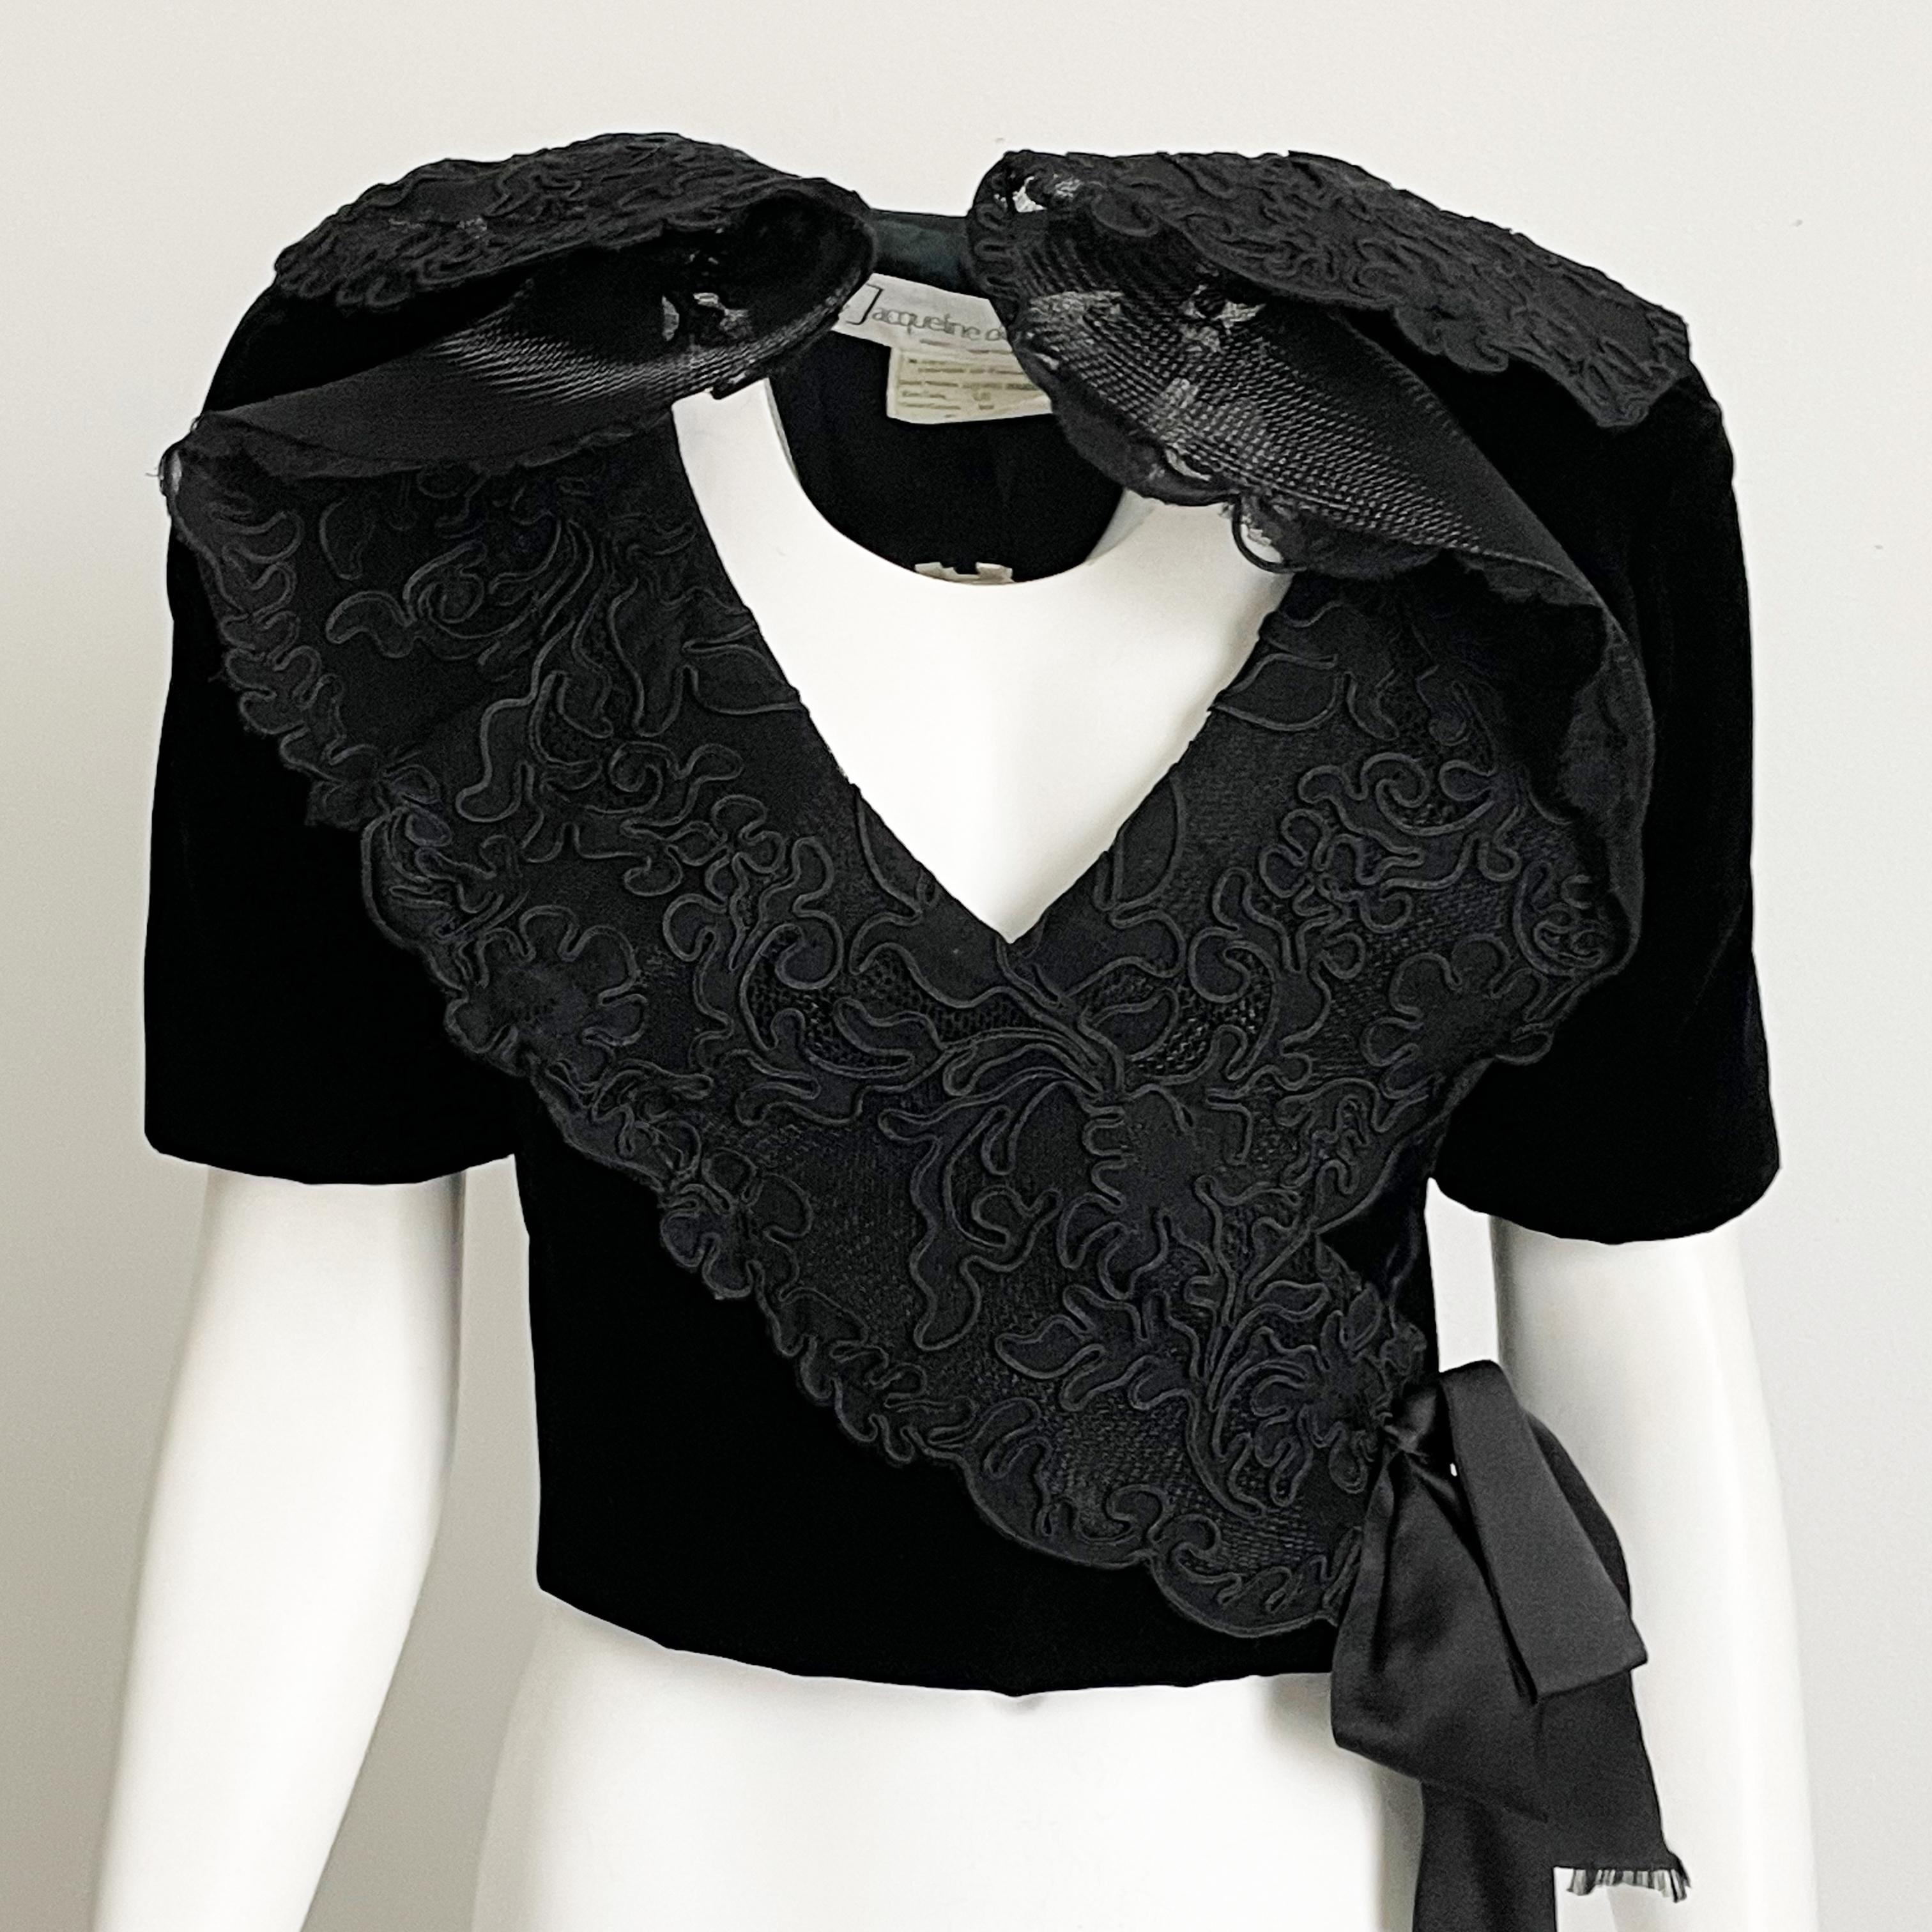 Preowned, vintage Jacqueline de Ribes black velvet bolero jacket with lace trim, circa the 80s.  

Made from black velvet, it features an oversized lace collar with tulle backing for shape.  It fastens with a hidden snap closure. 

Pair with your